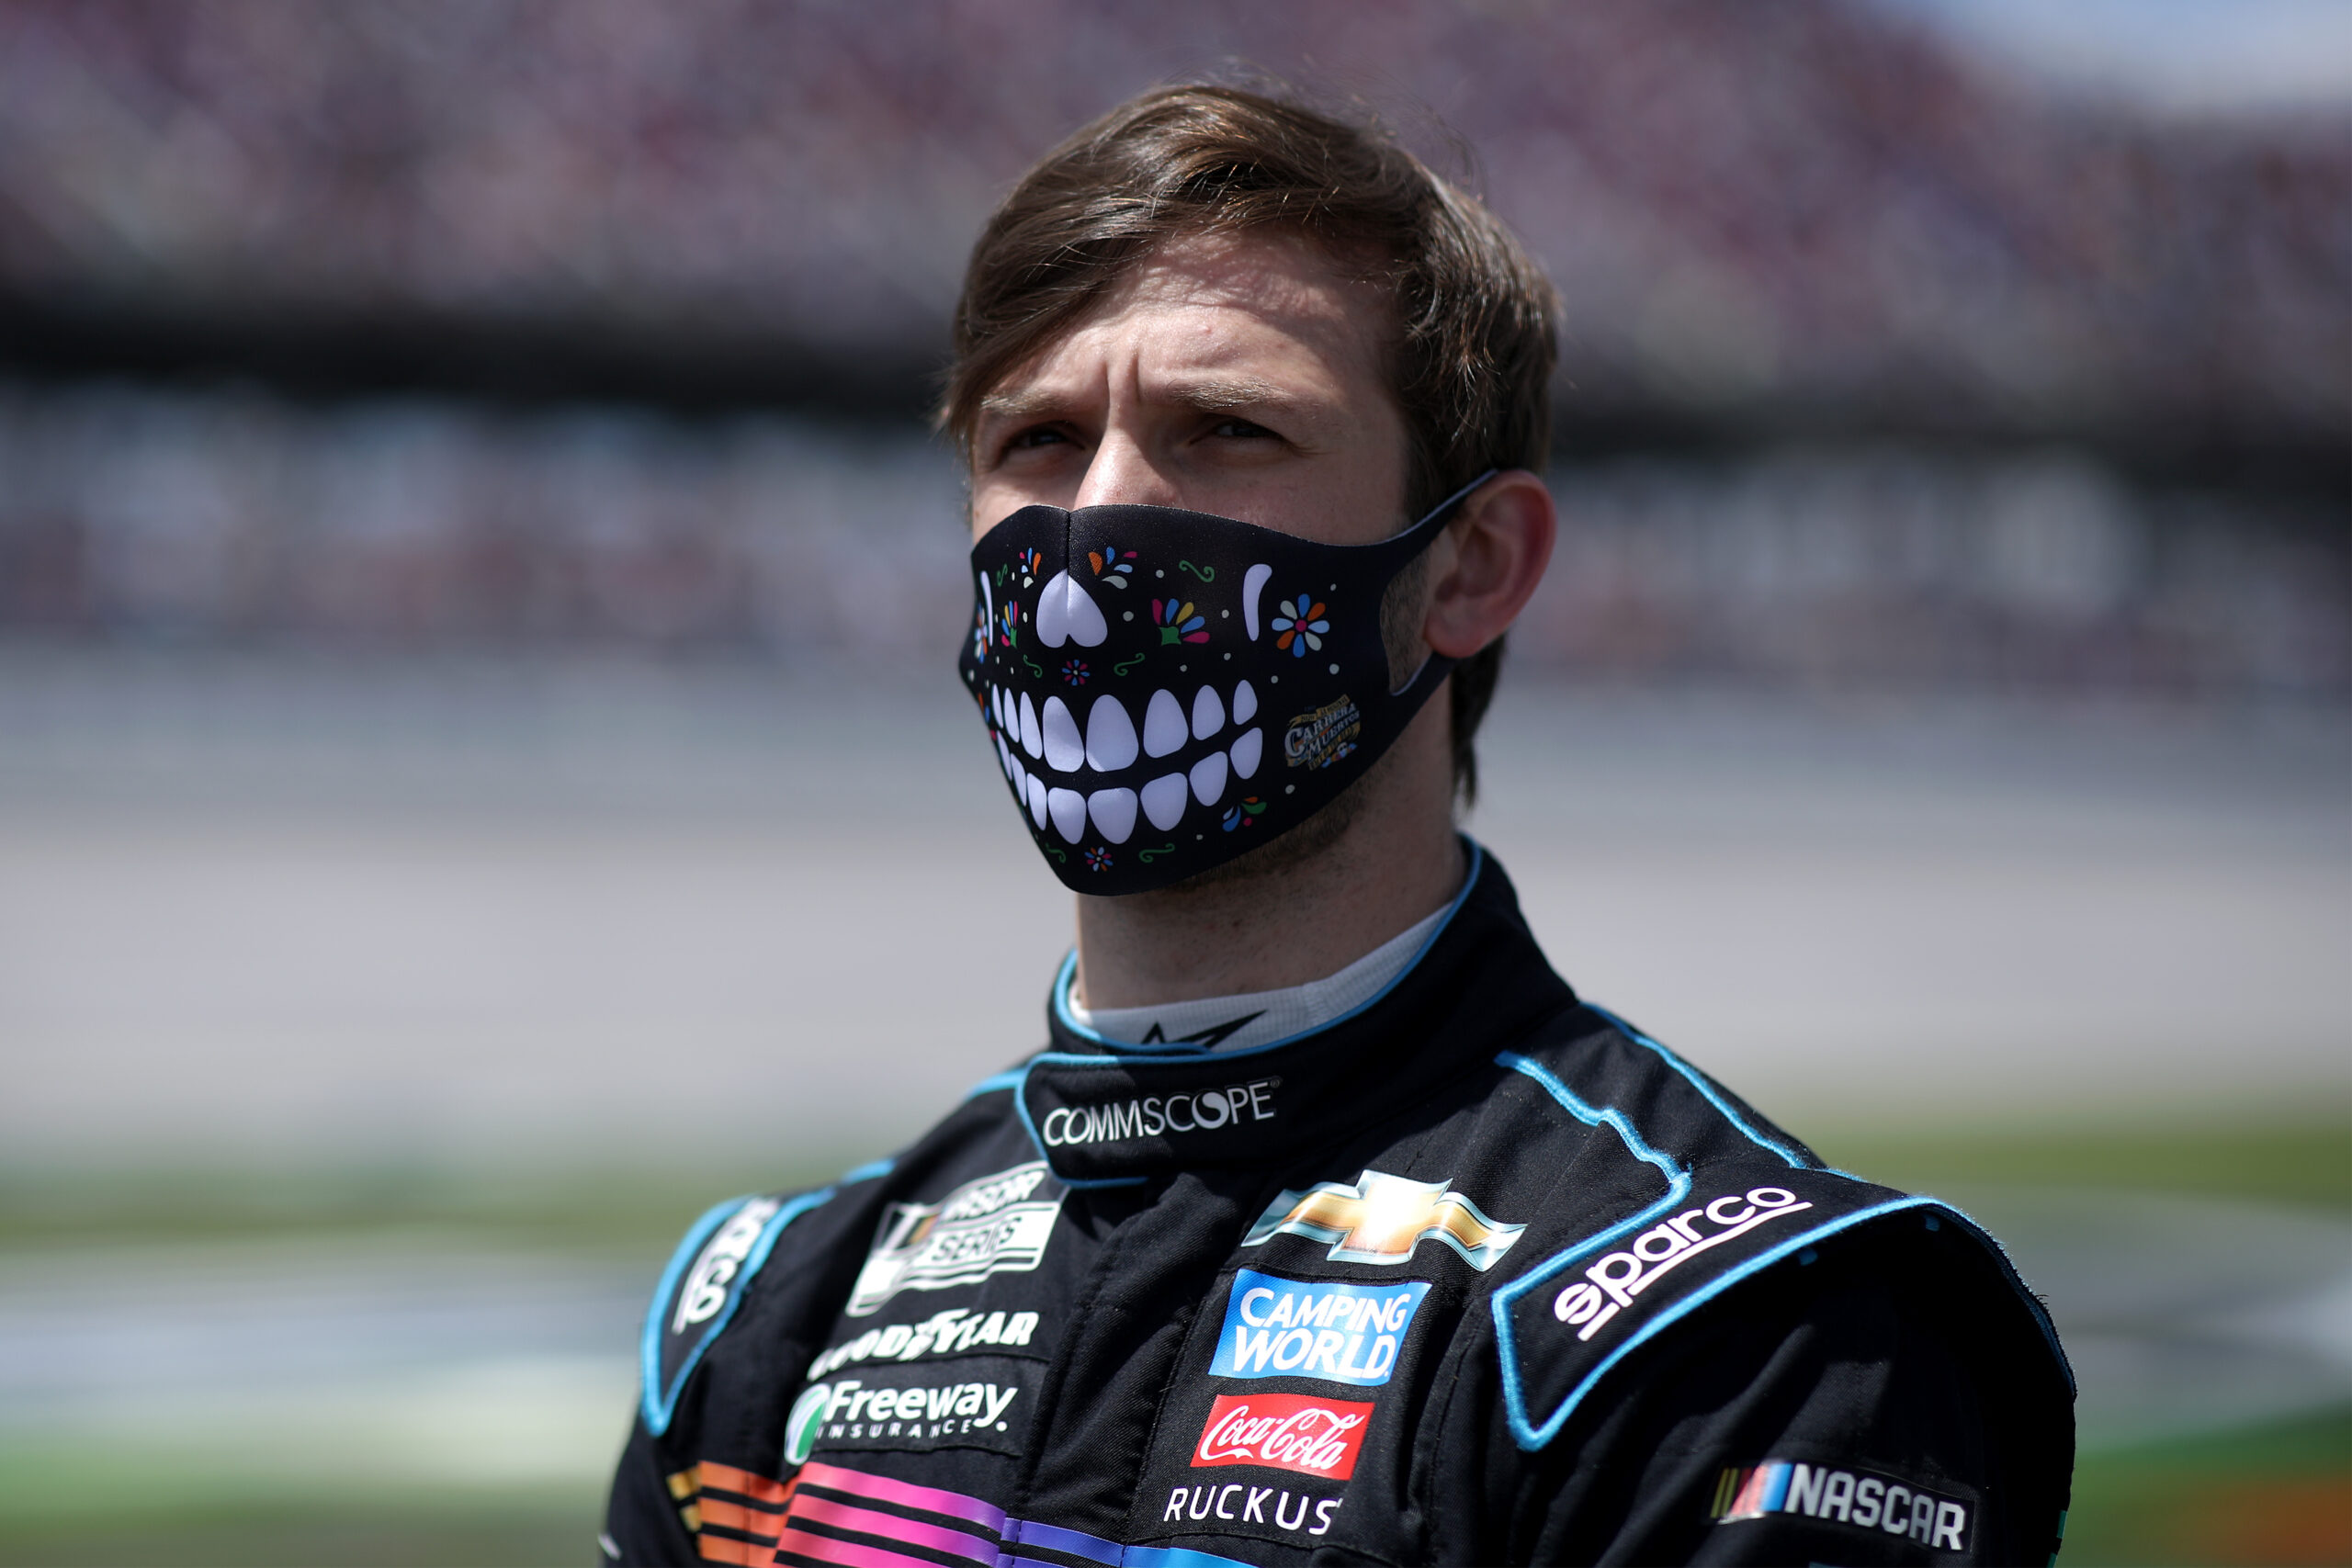 By all means, Daniel Suarez and Trackhouse Racing are off to a solid start. (Photo: Sean Gardner/Getty Images)